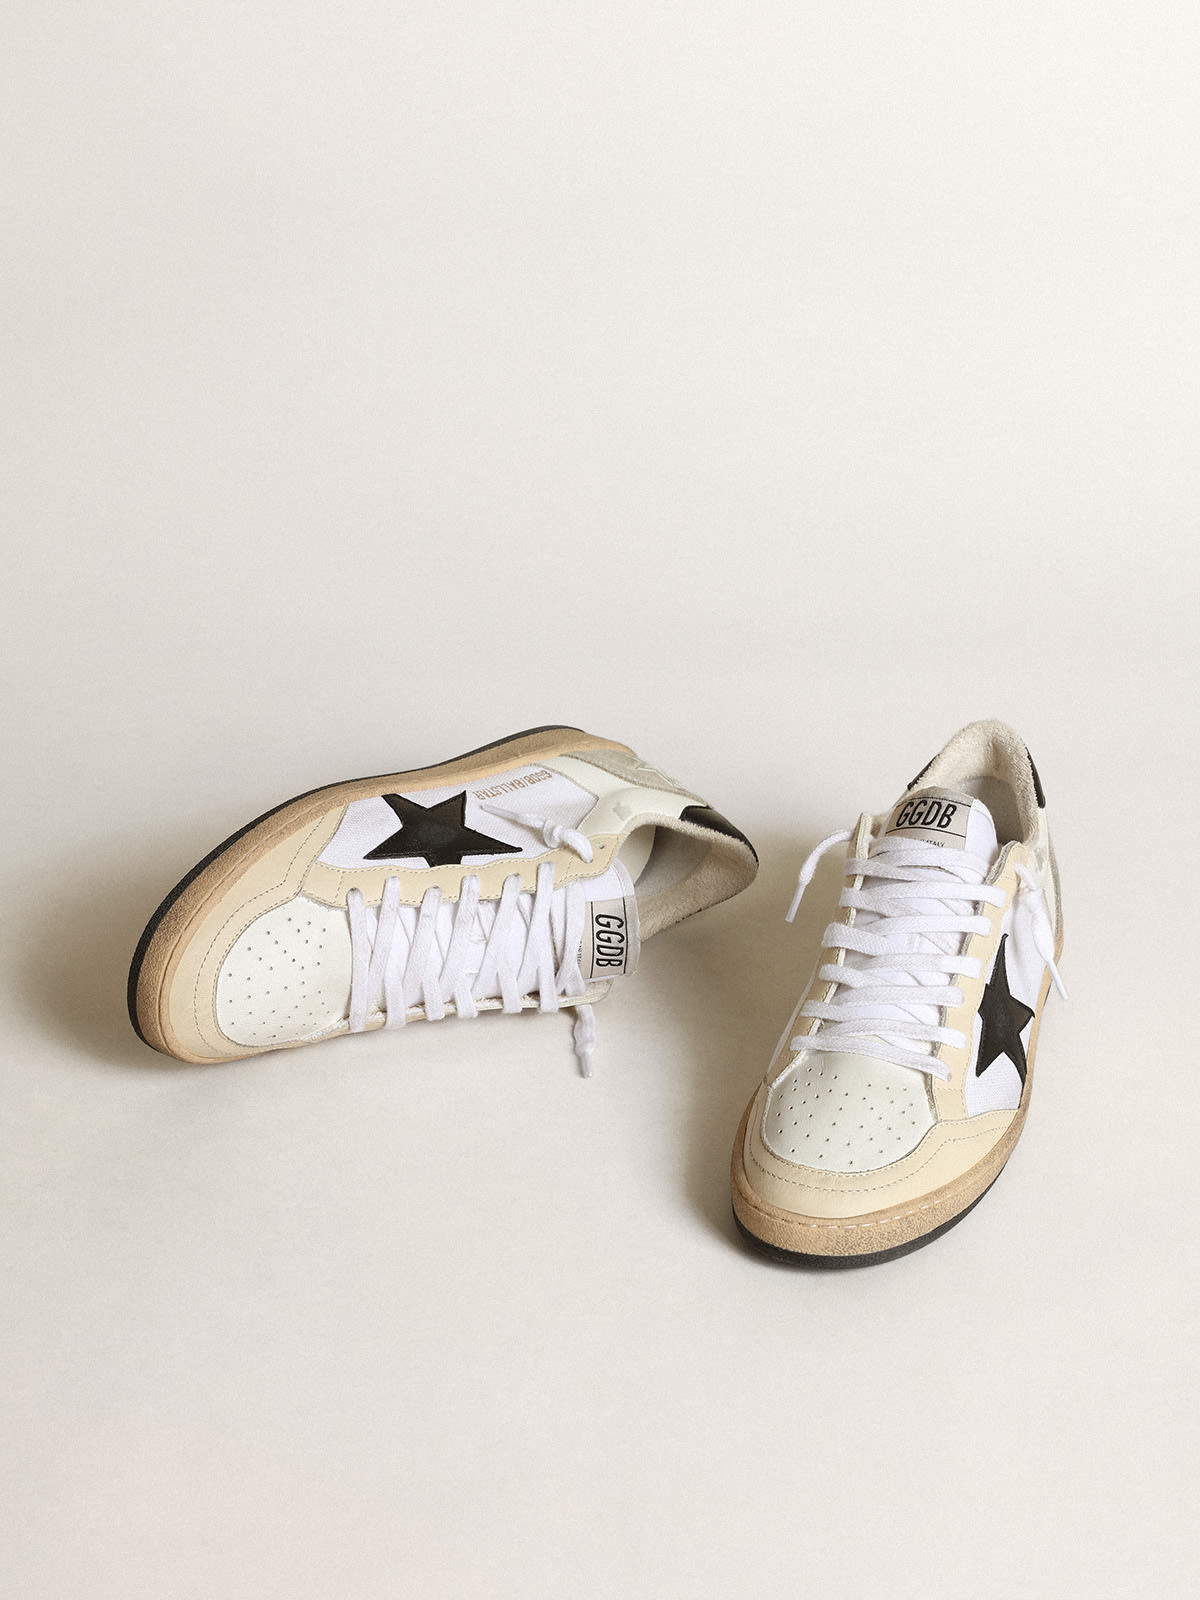 Golden Goose - Women’s Ball Star sneakers in white canvas and leather with ivory leather inserts and black nappa leather star in 